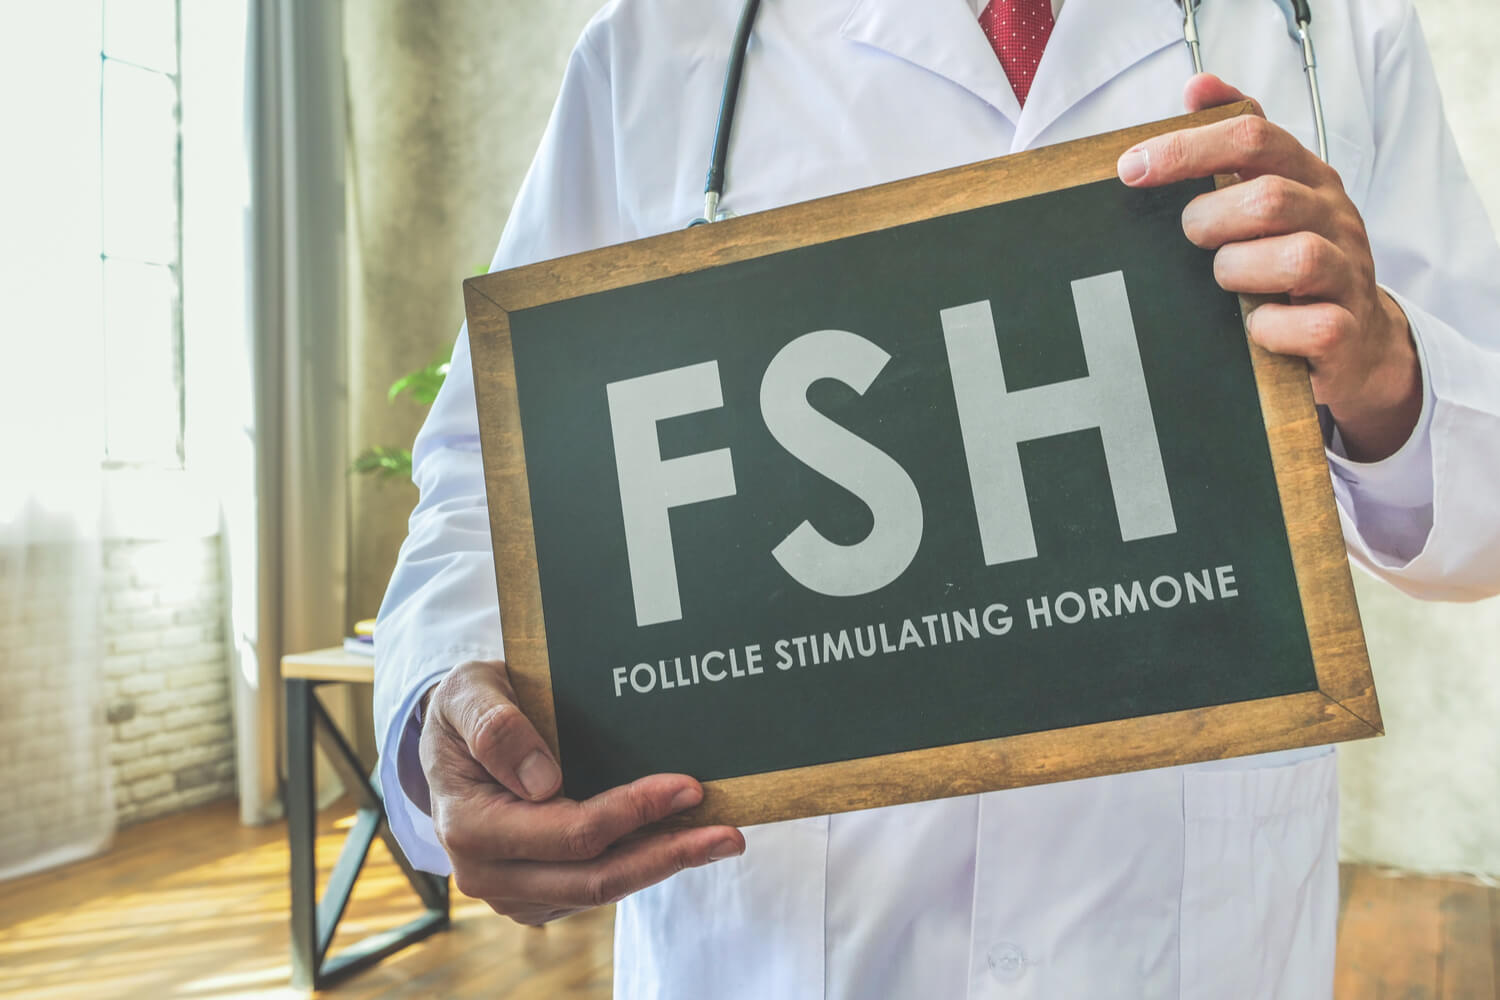 Normal Follicle Stimulating Hormone (FSH) Level to Get Pregnant